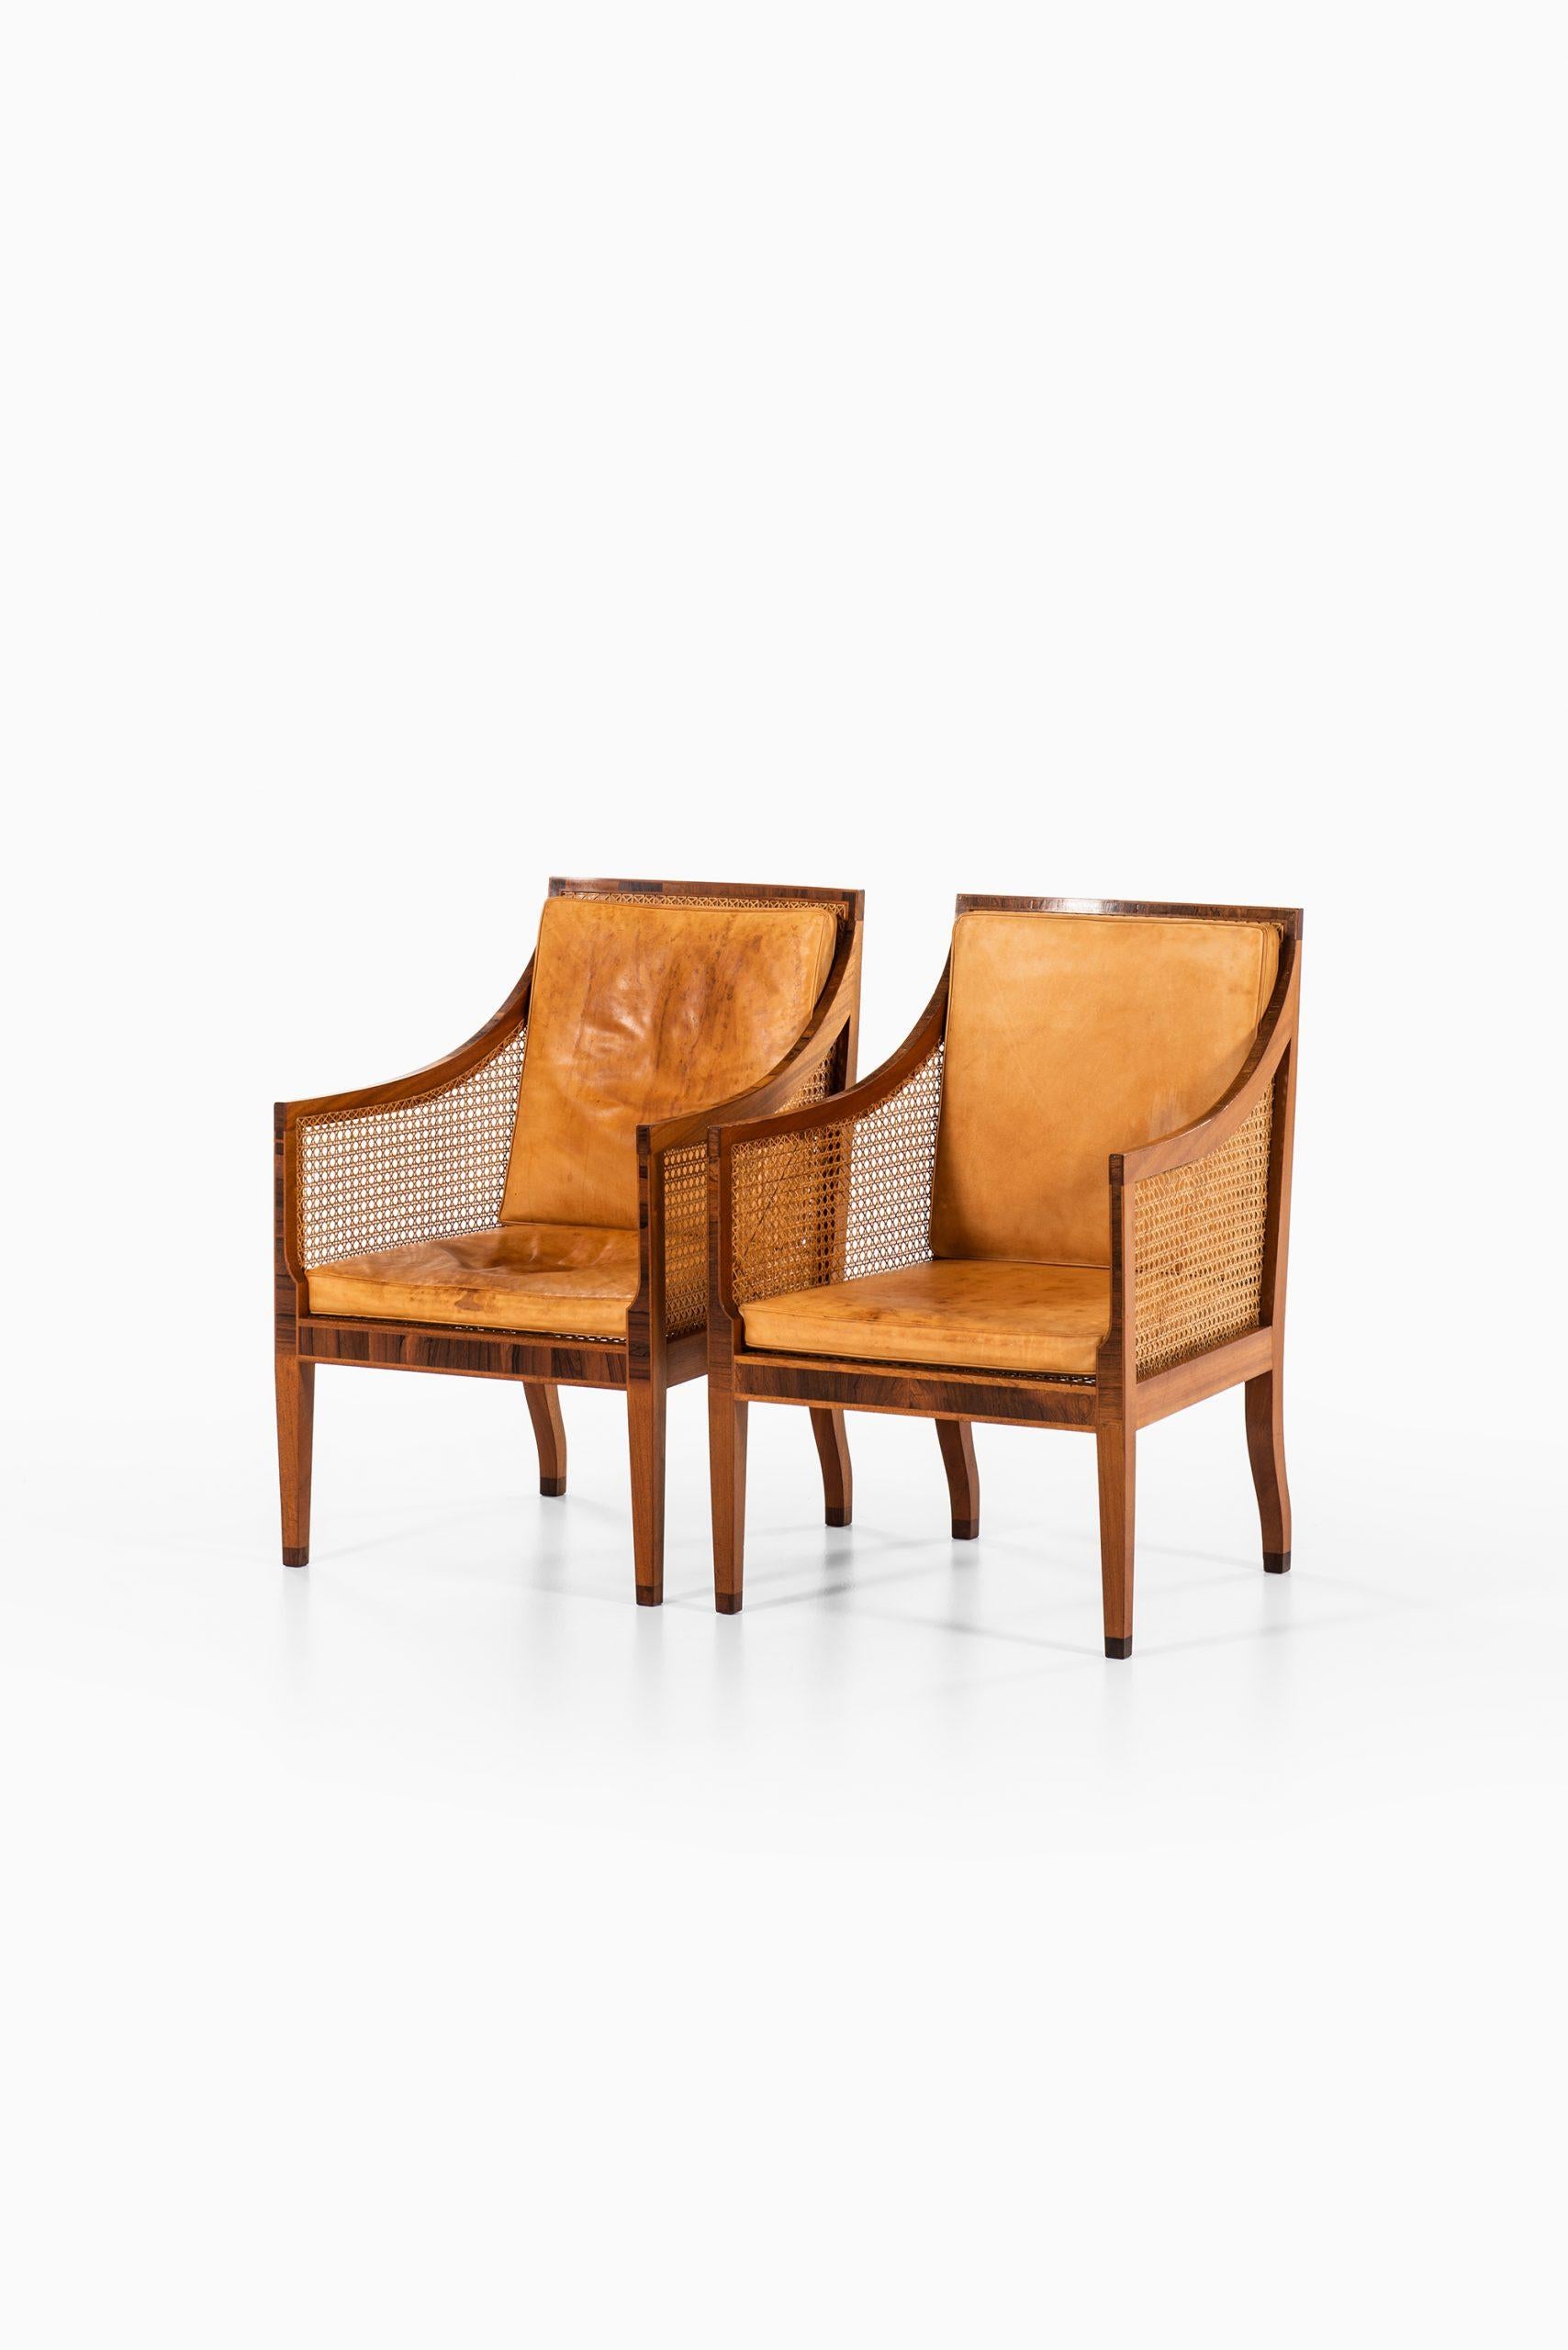 Rare pair of bergère / model 4488 easy chairs designed by Kaare Klint. Produced by Rud. Rasmussen Cabinetmakers in Denmark.